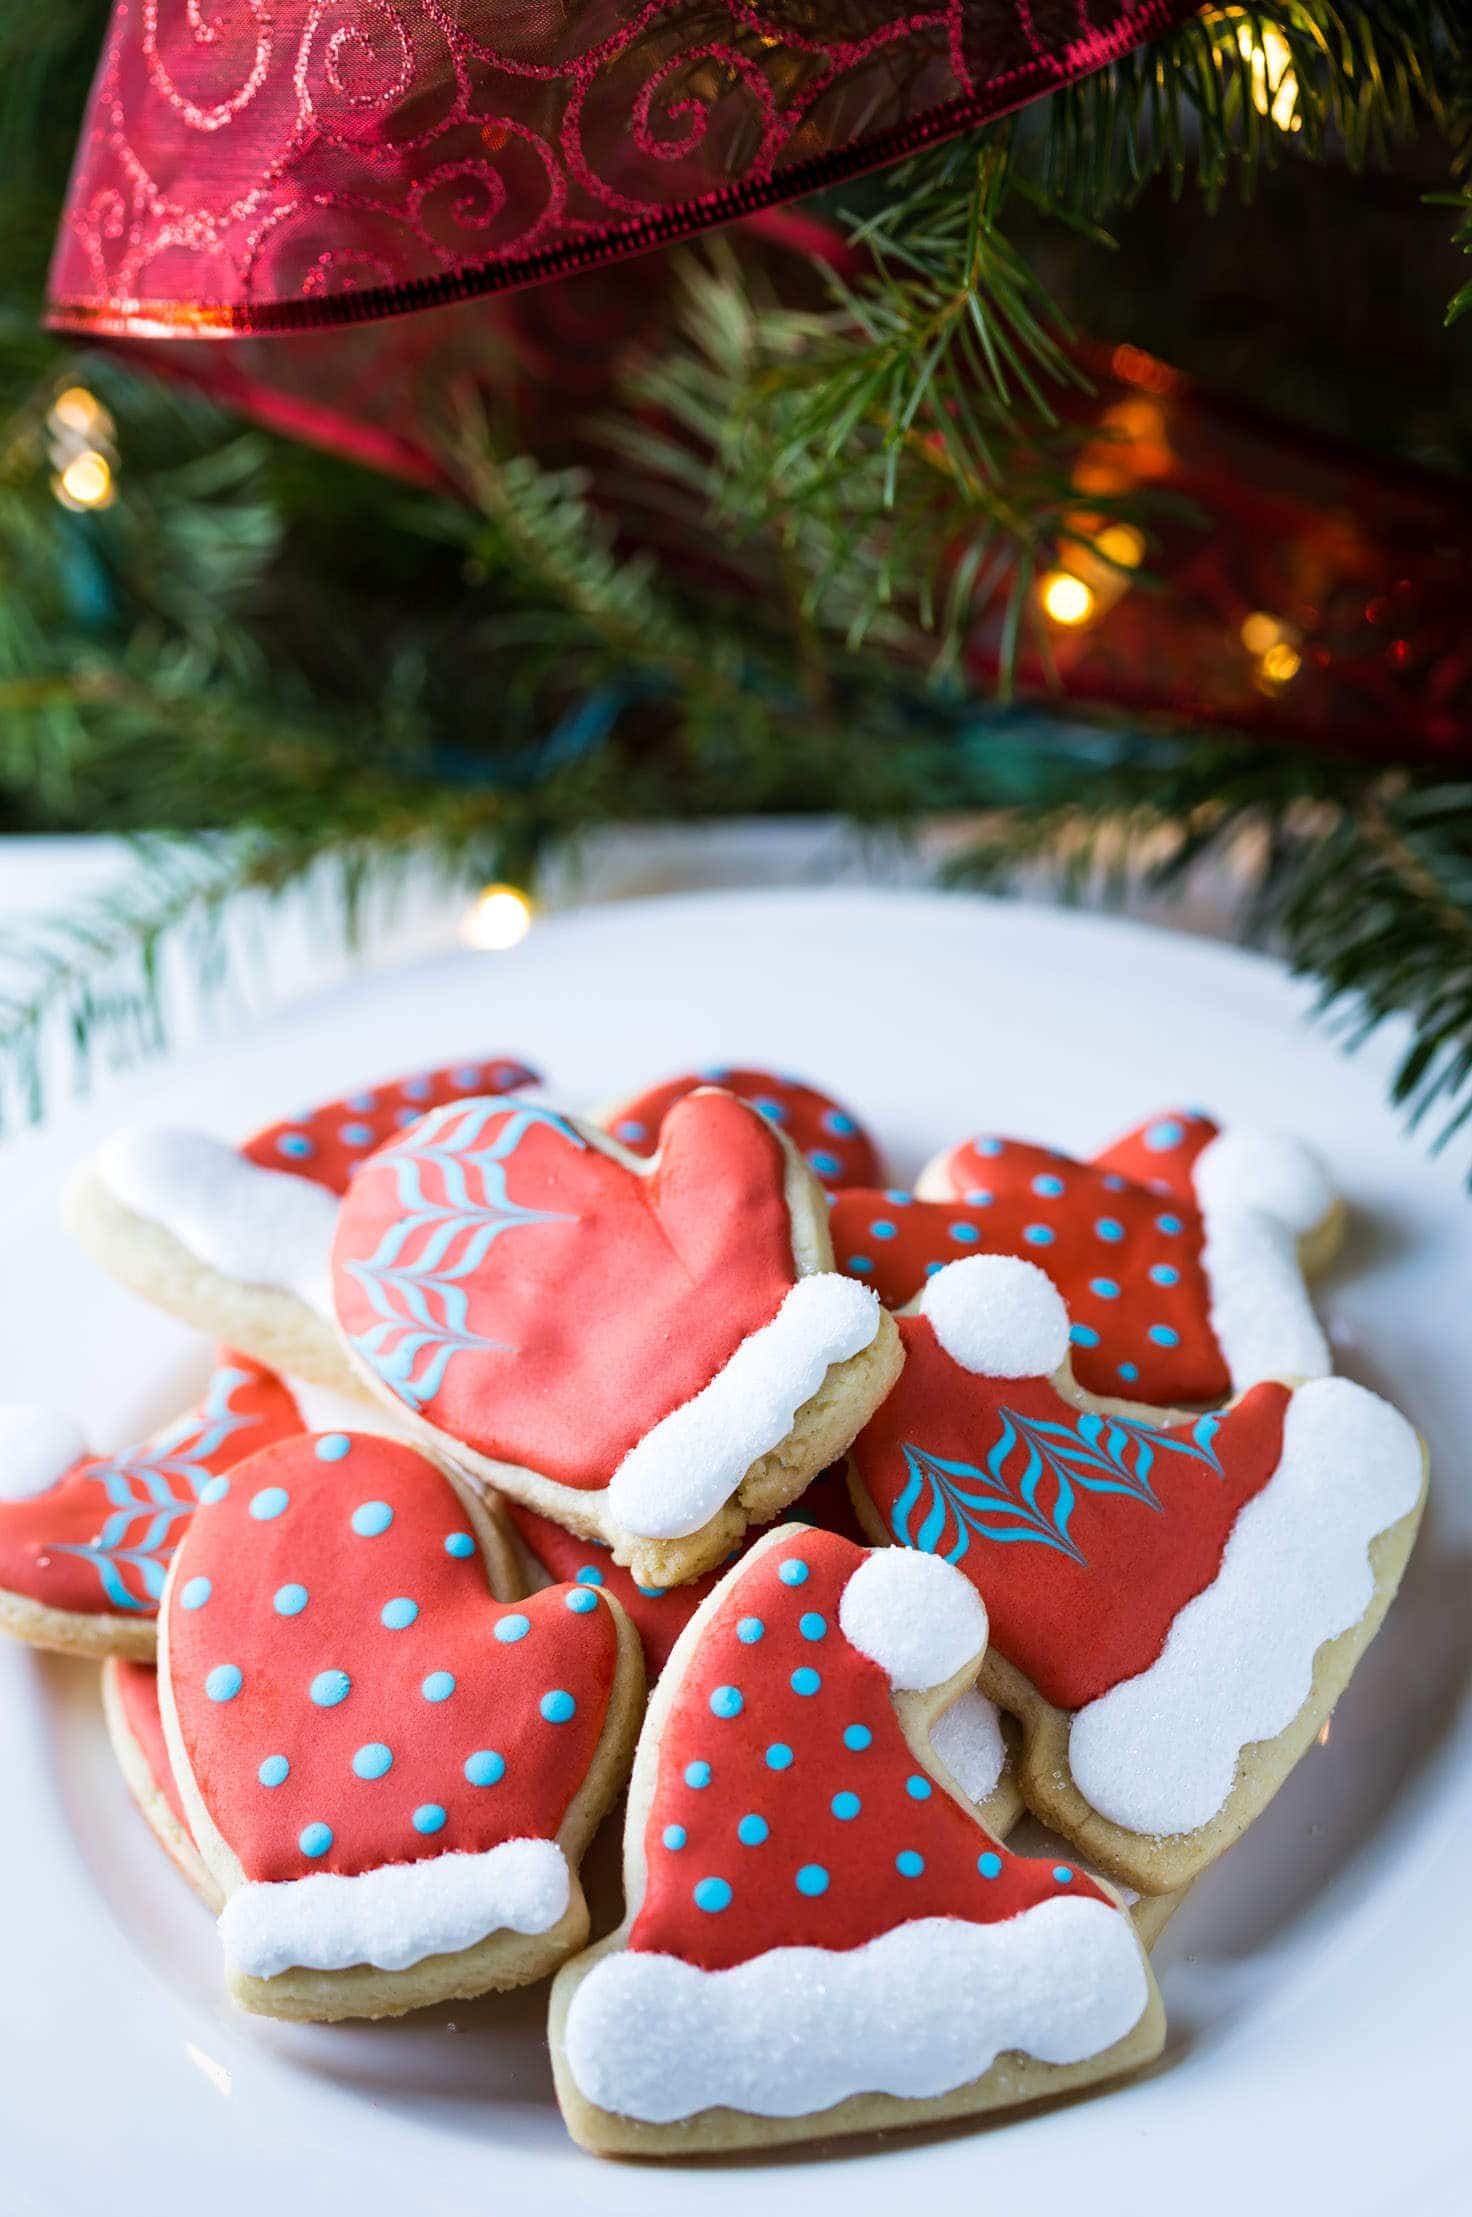 Gluten Free Iced Christmas Biscuits